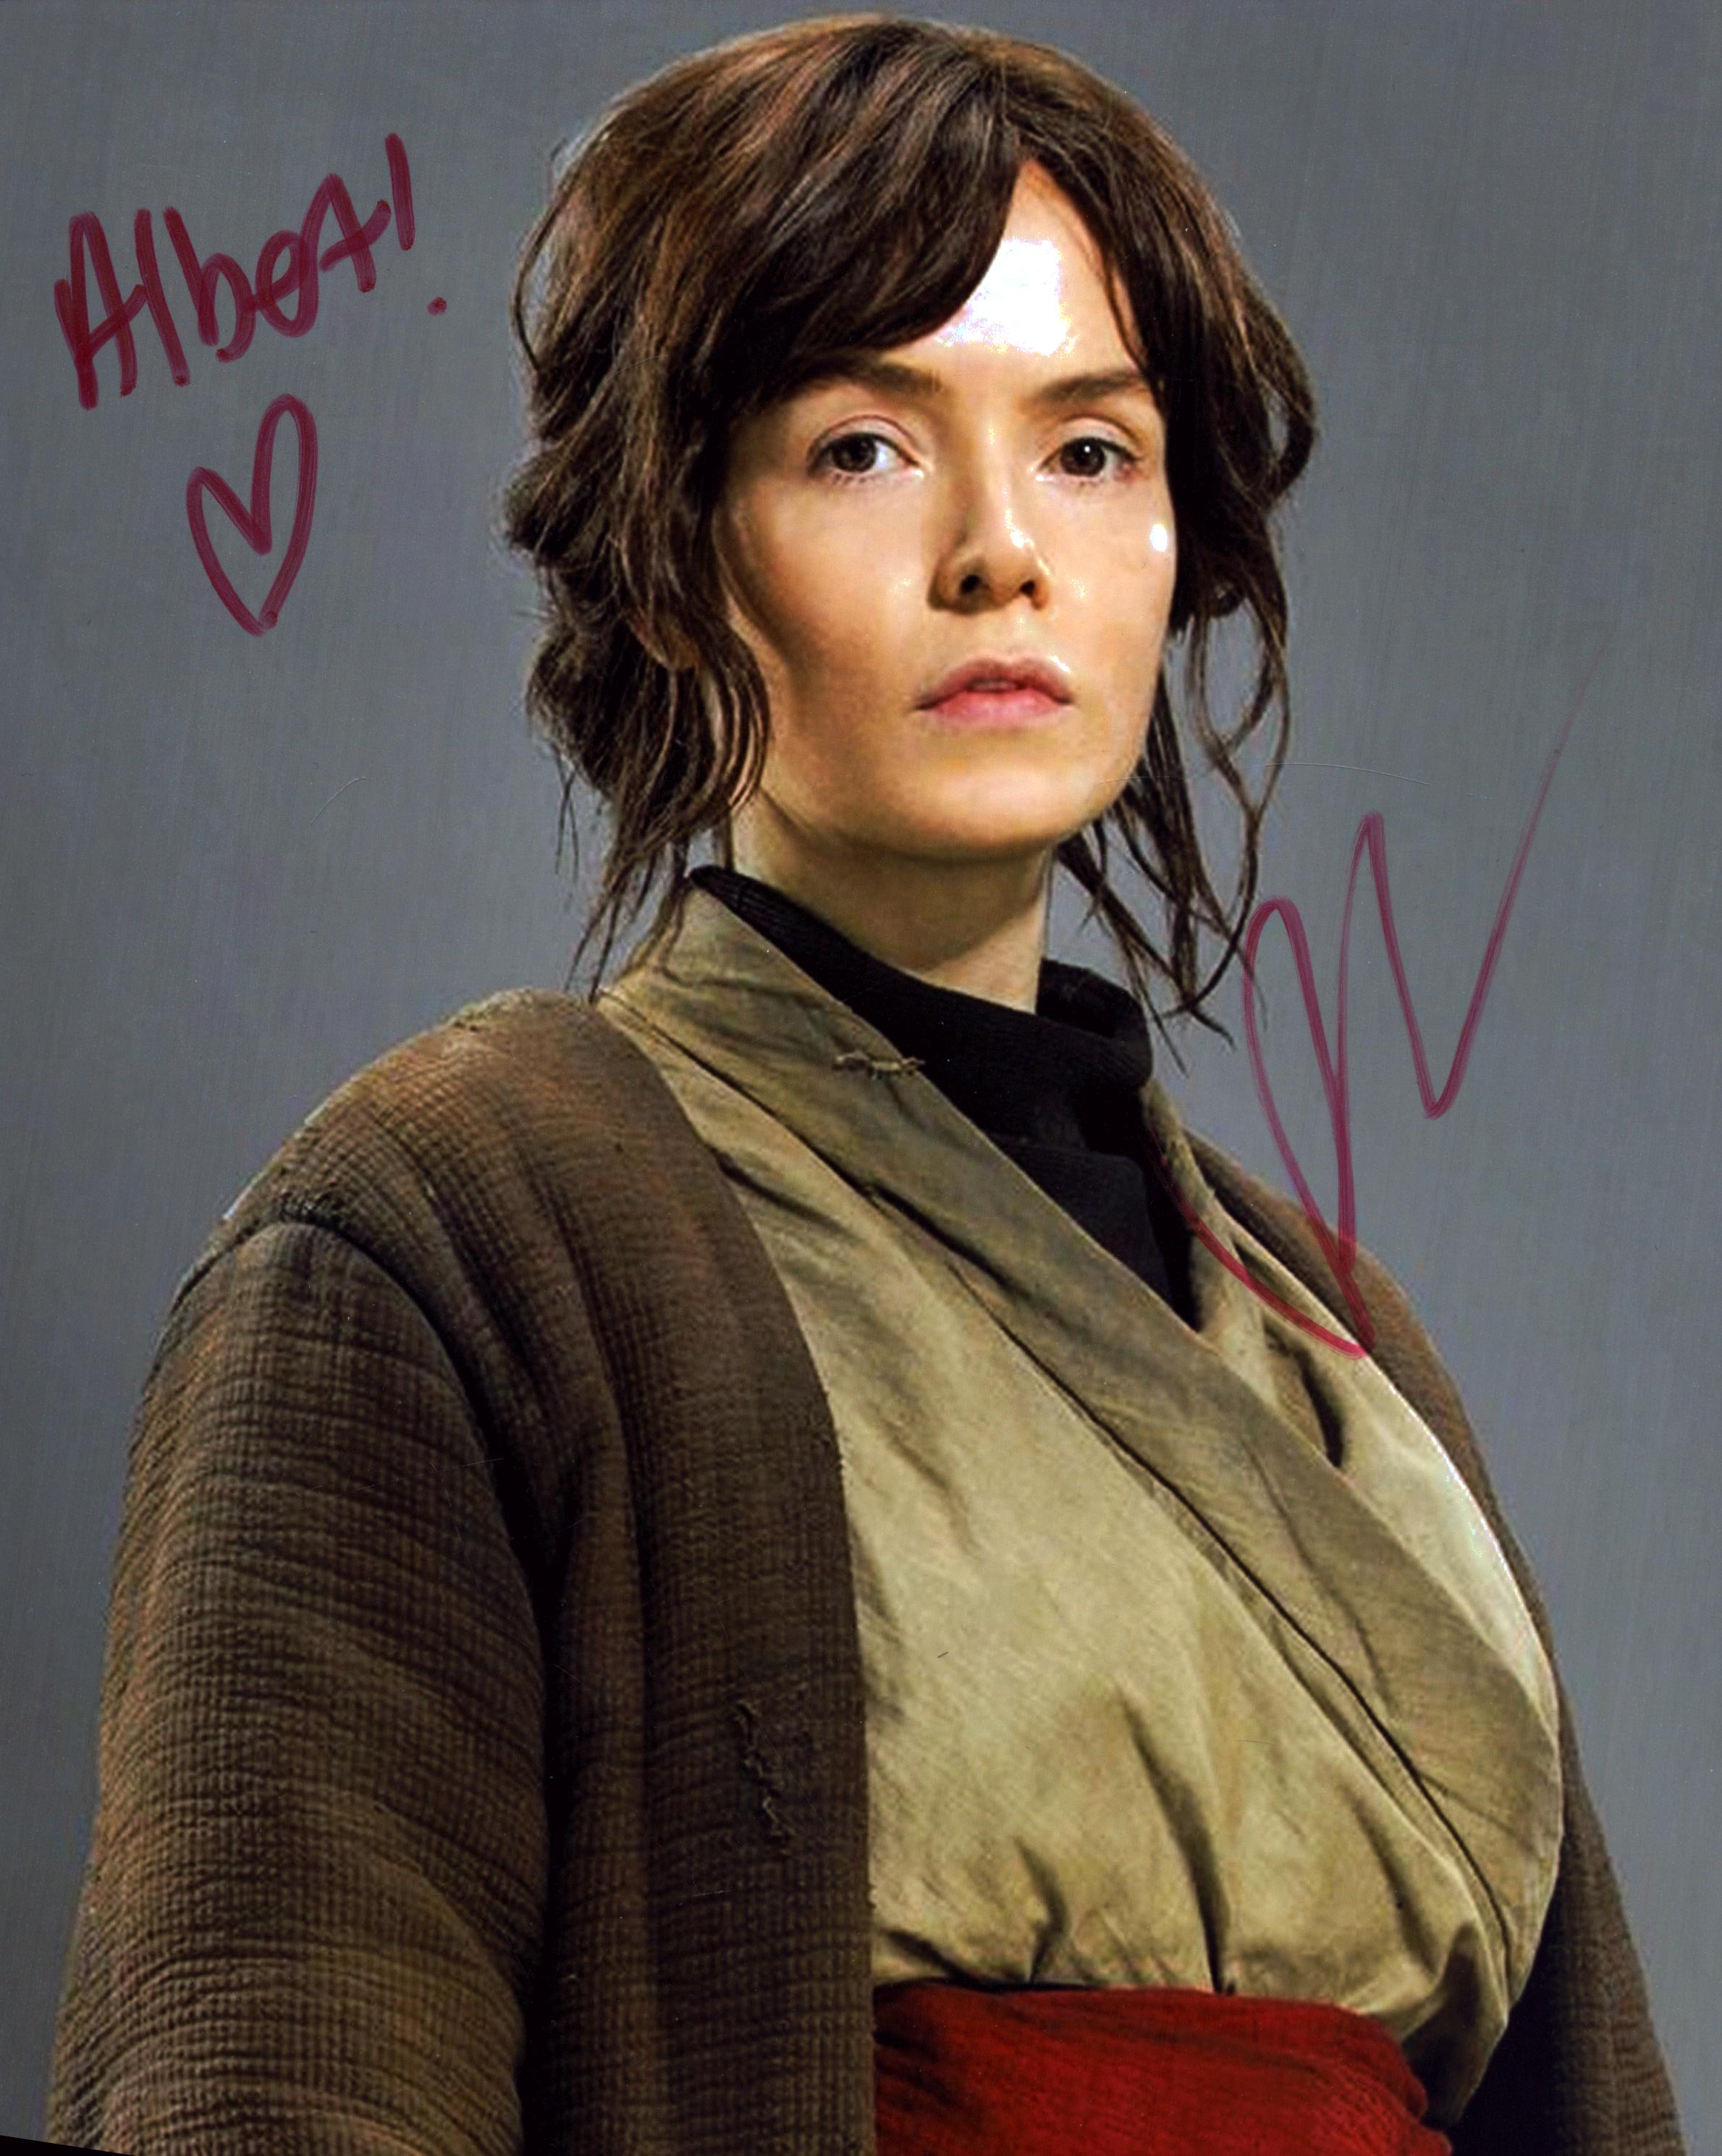 Valerie Kane signed 10x8 inch Star Wars colour photo. Dedicated. Good Condition. All autographs come